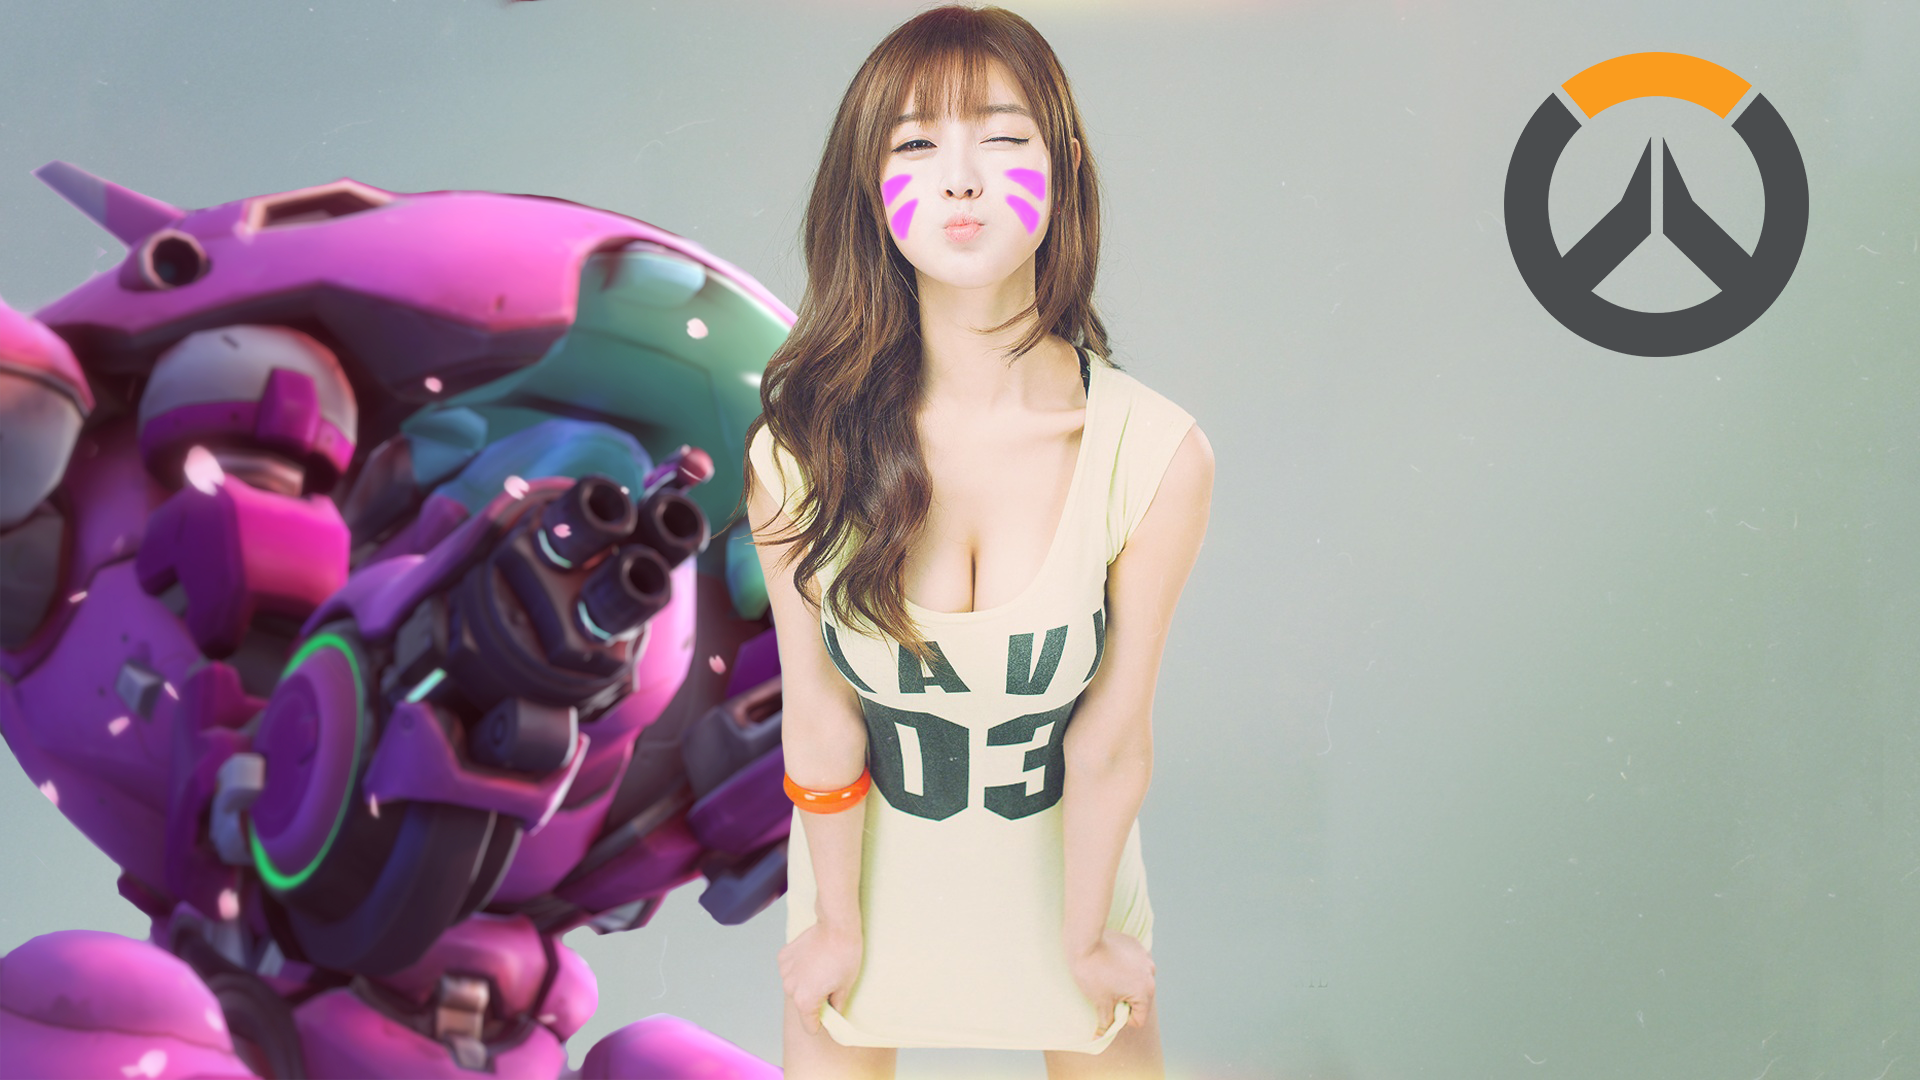 People 1920x1080 D.Va (Overwatch) Overwatch women cosplay Asian Choi Seul GI photo manipulation video game characters